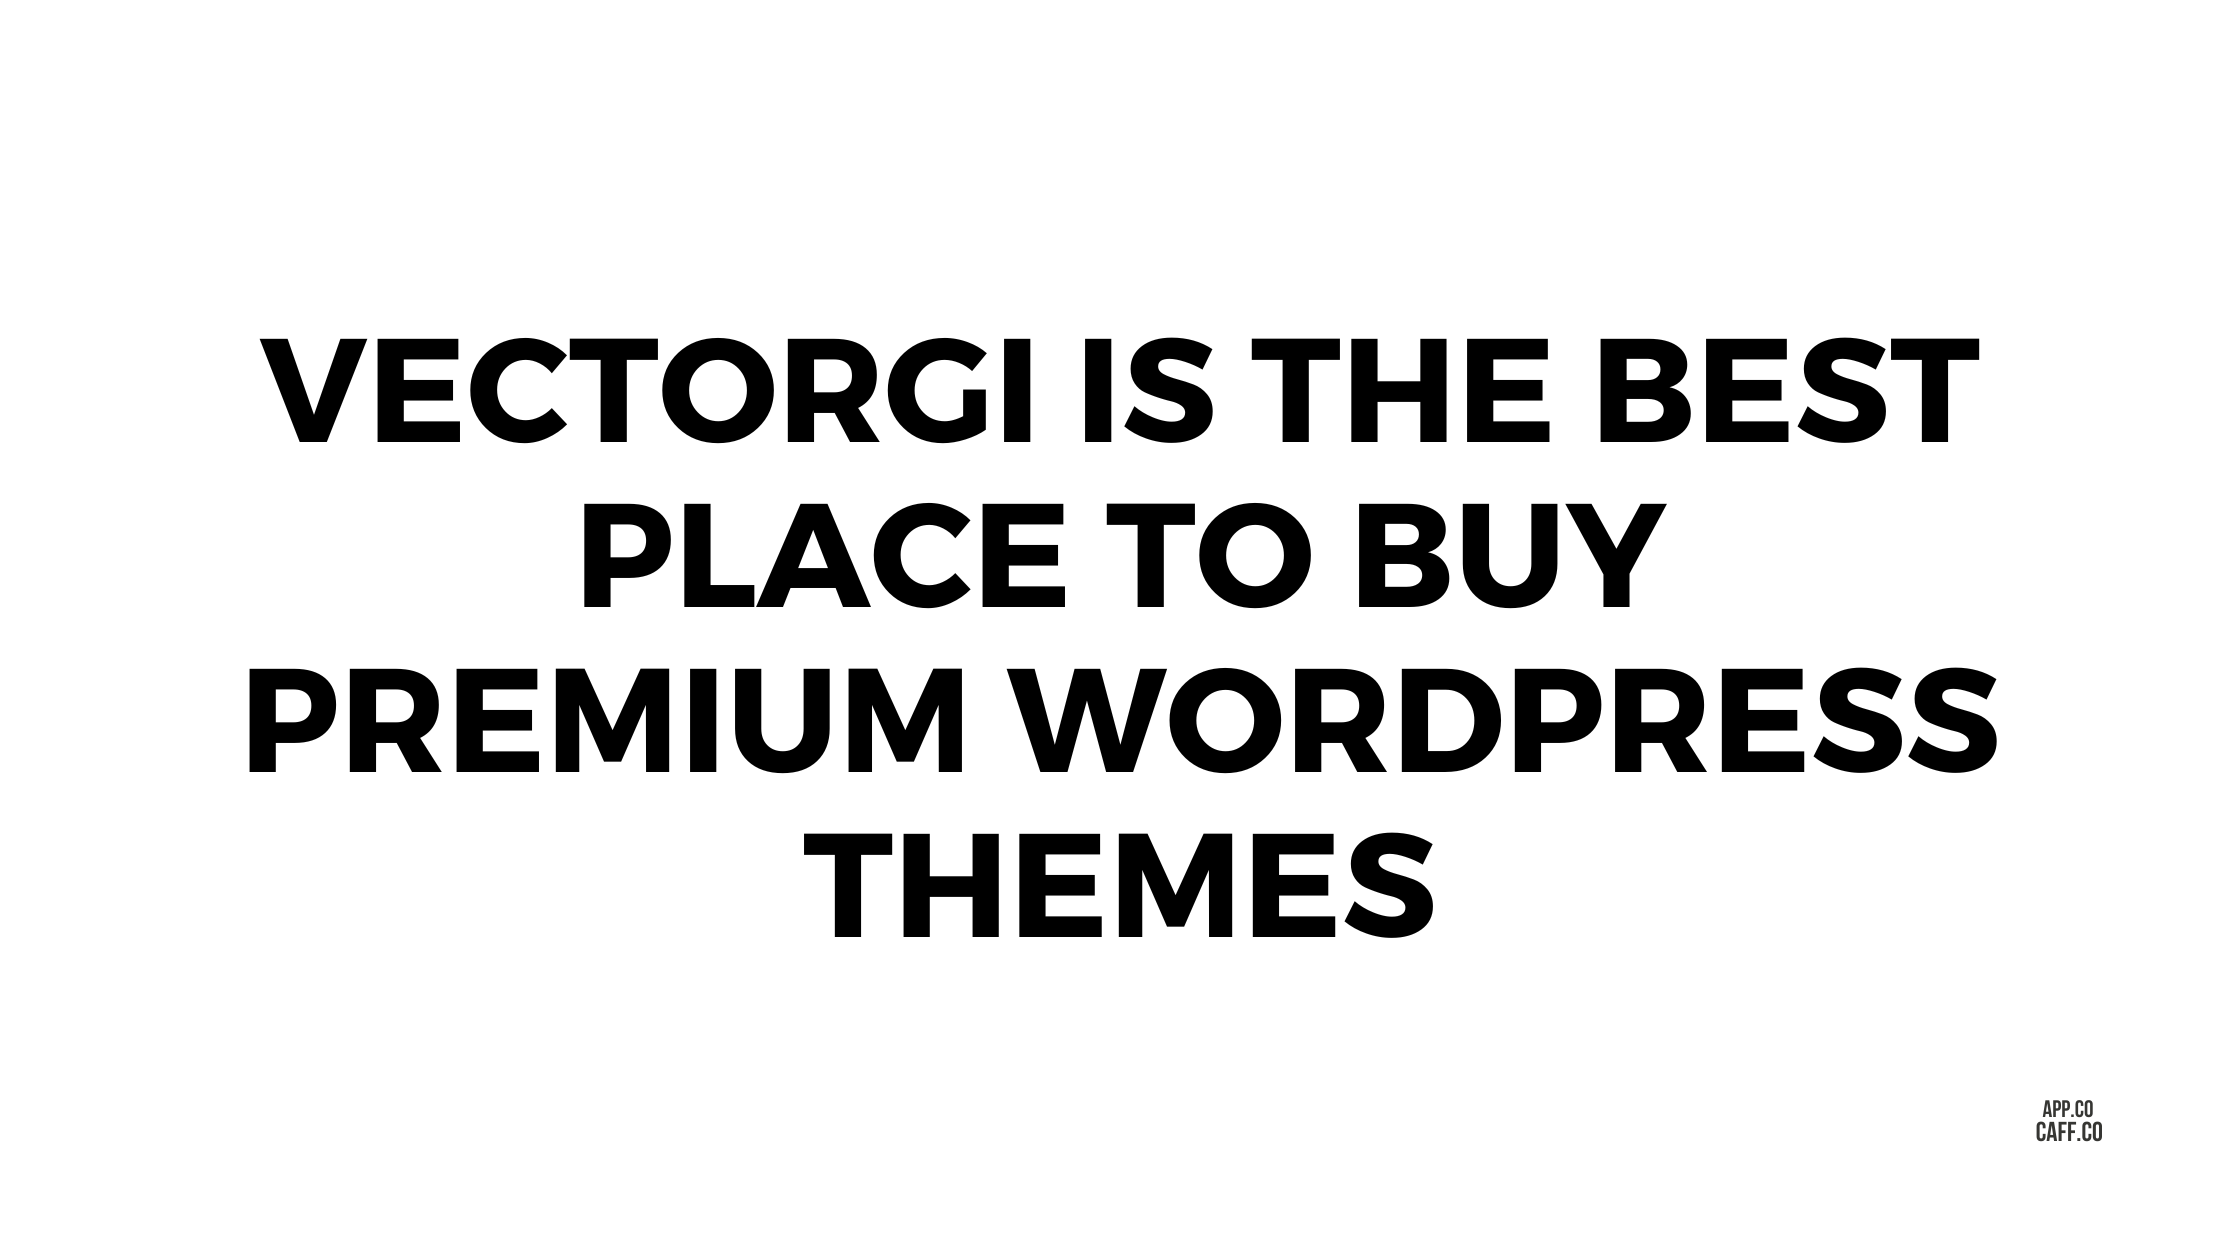 Vectorgi is the Best Place to Buy Premium WordPress Themes